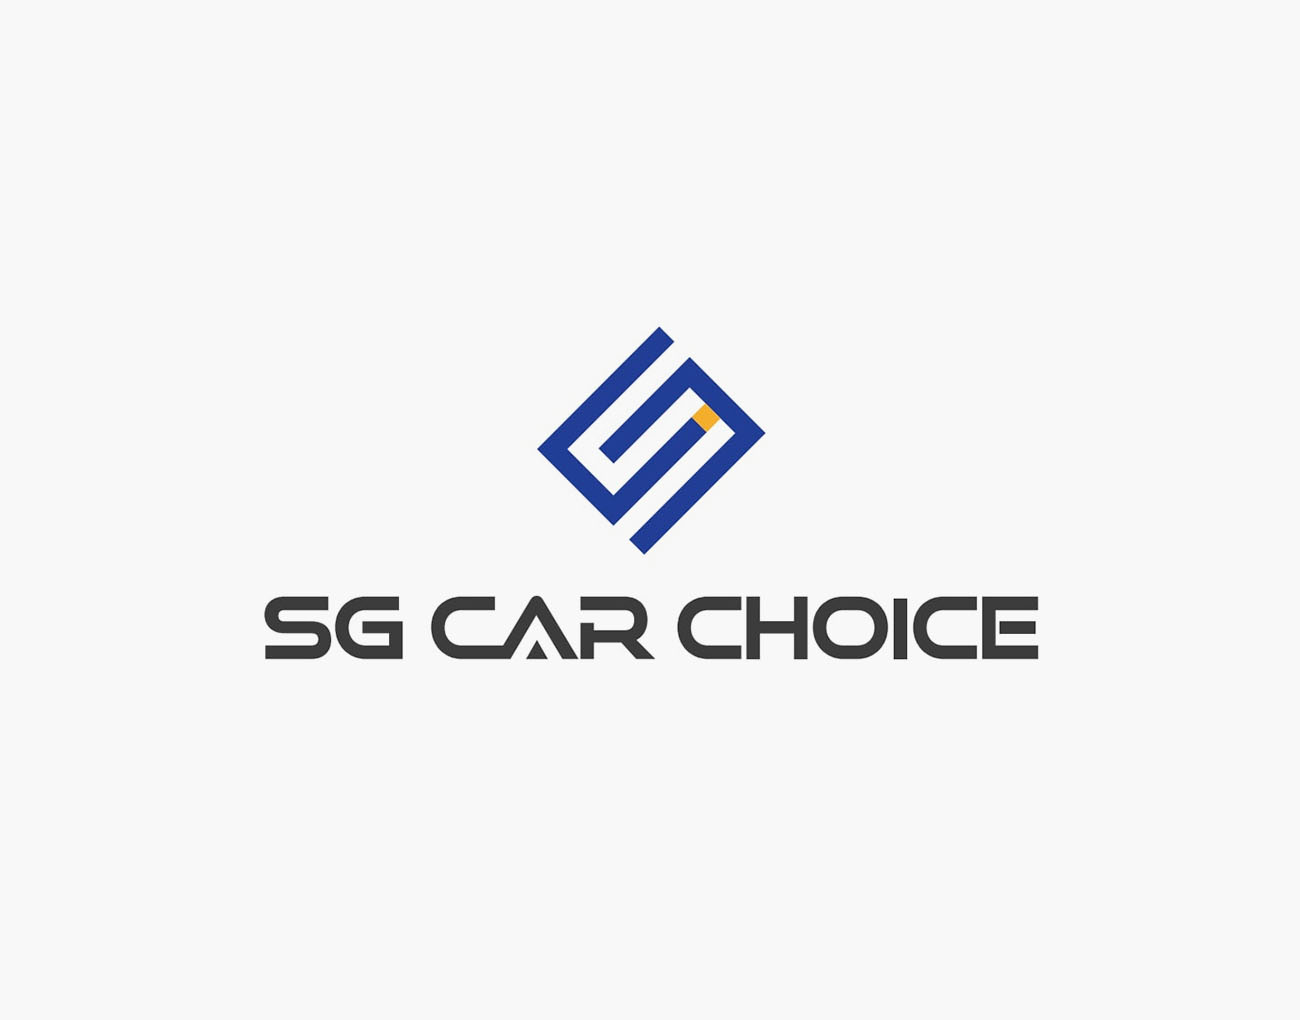 challenge statements sg car choice - The Greentech Accelerator 2022